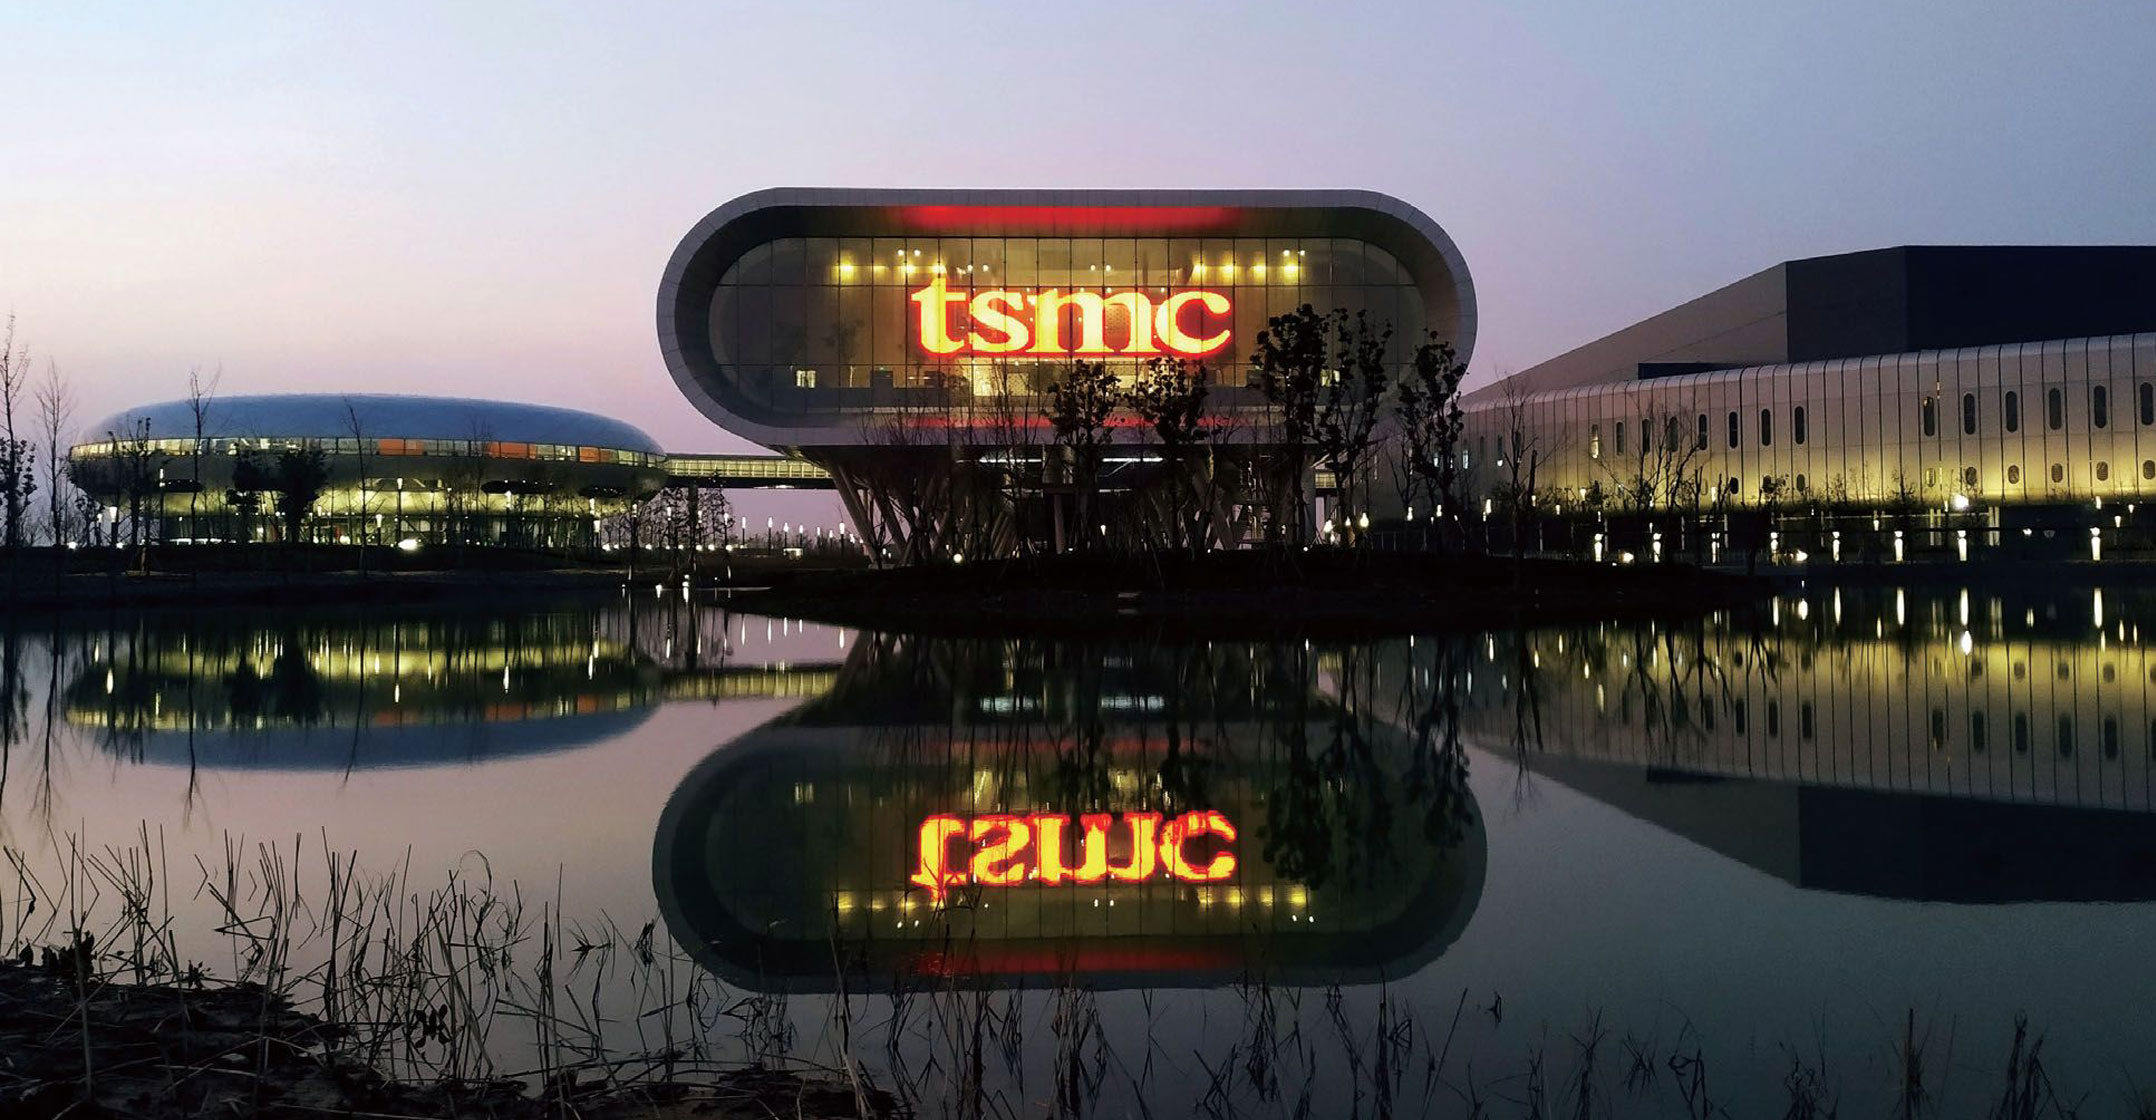 China urged to seize TSMC if US ramps up sanctions - TechCentral